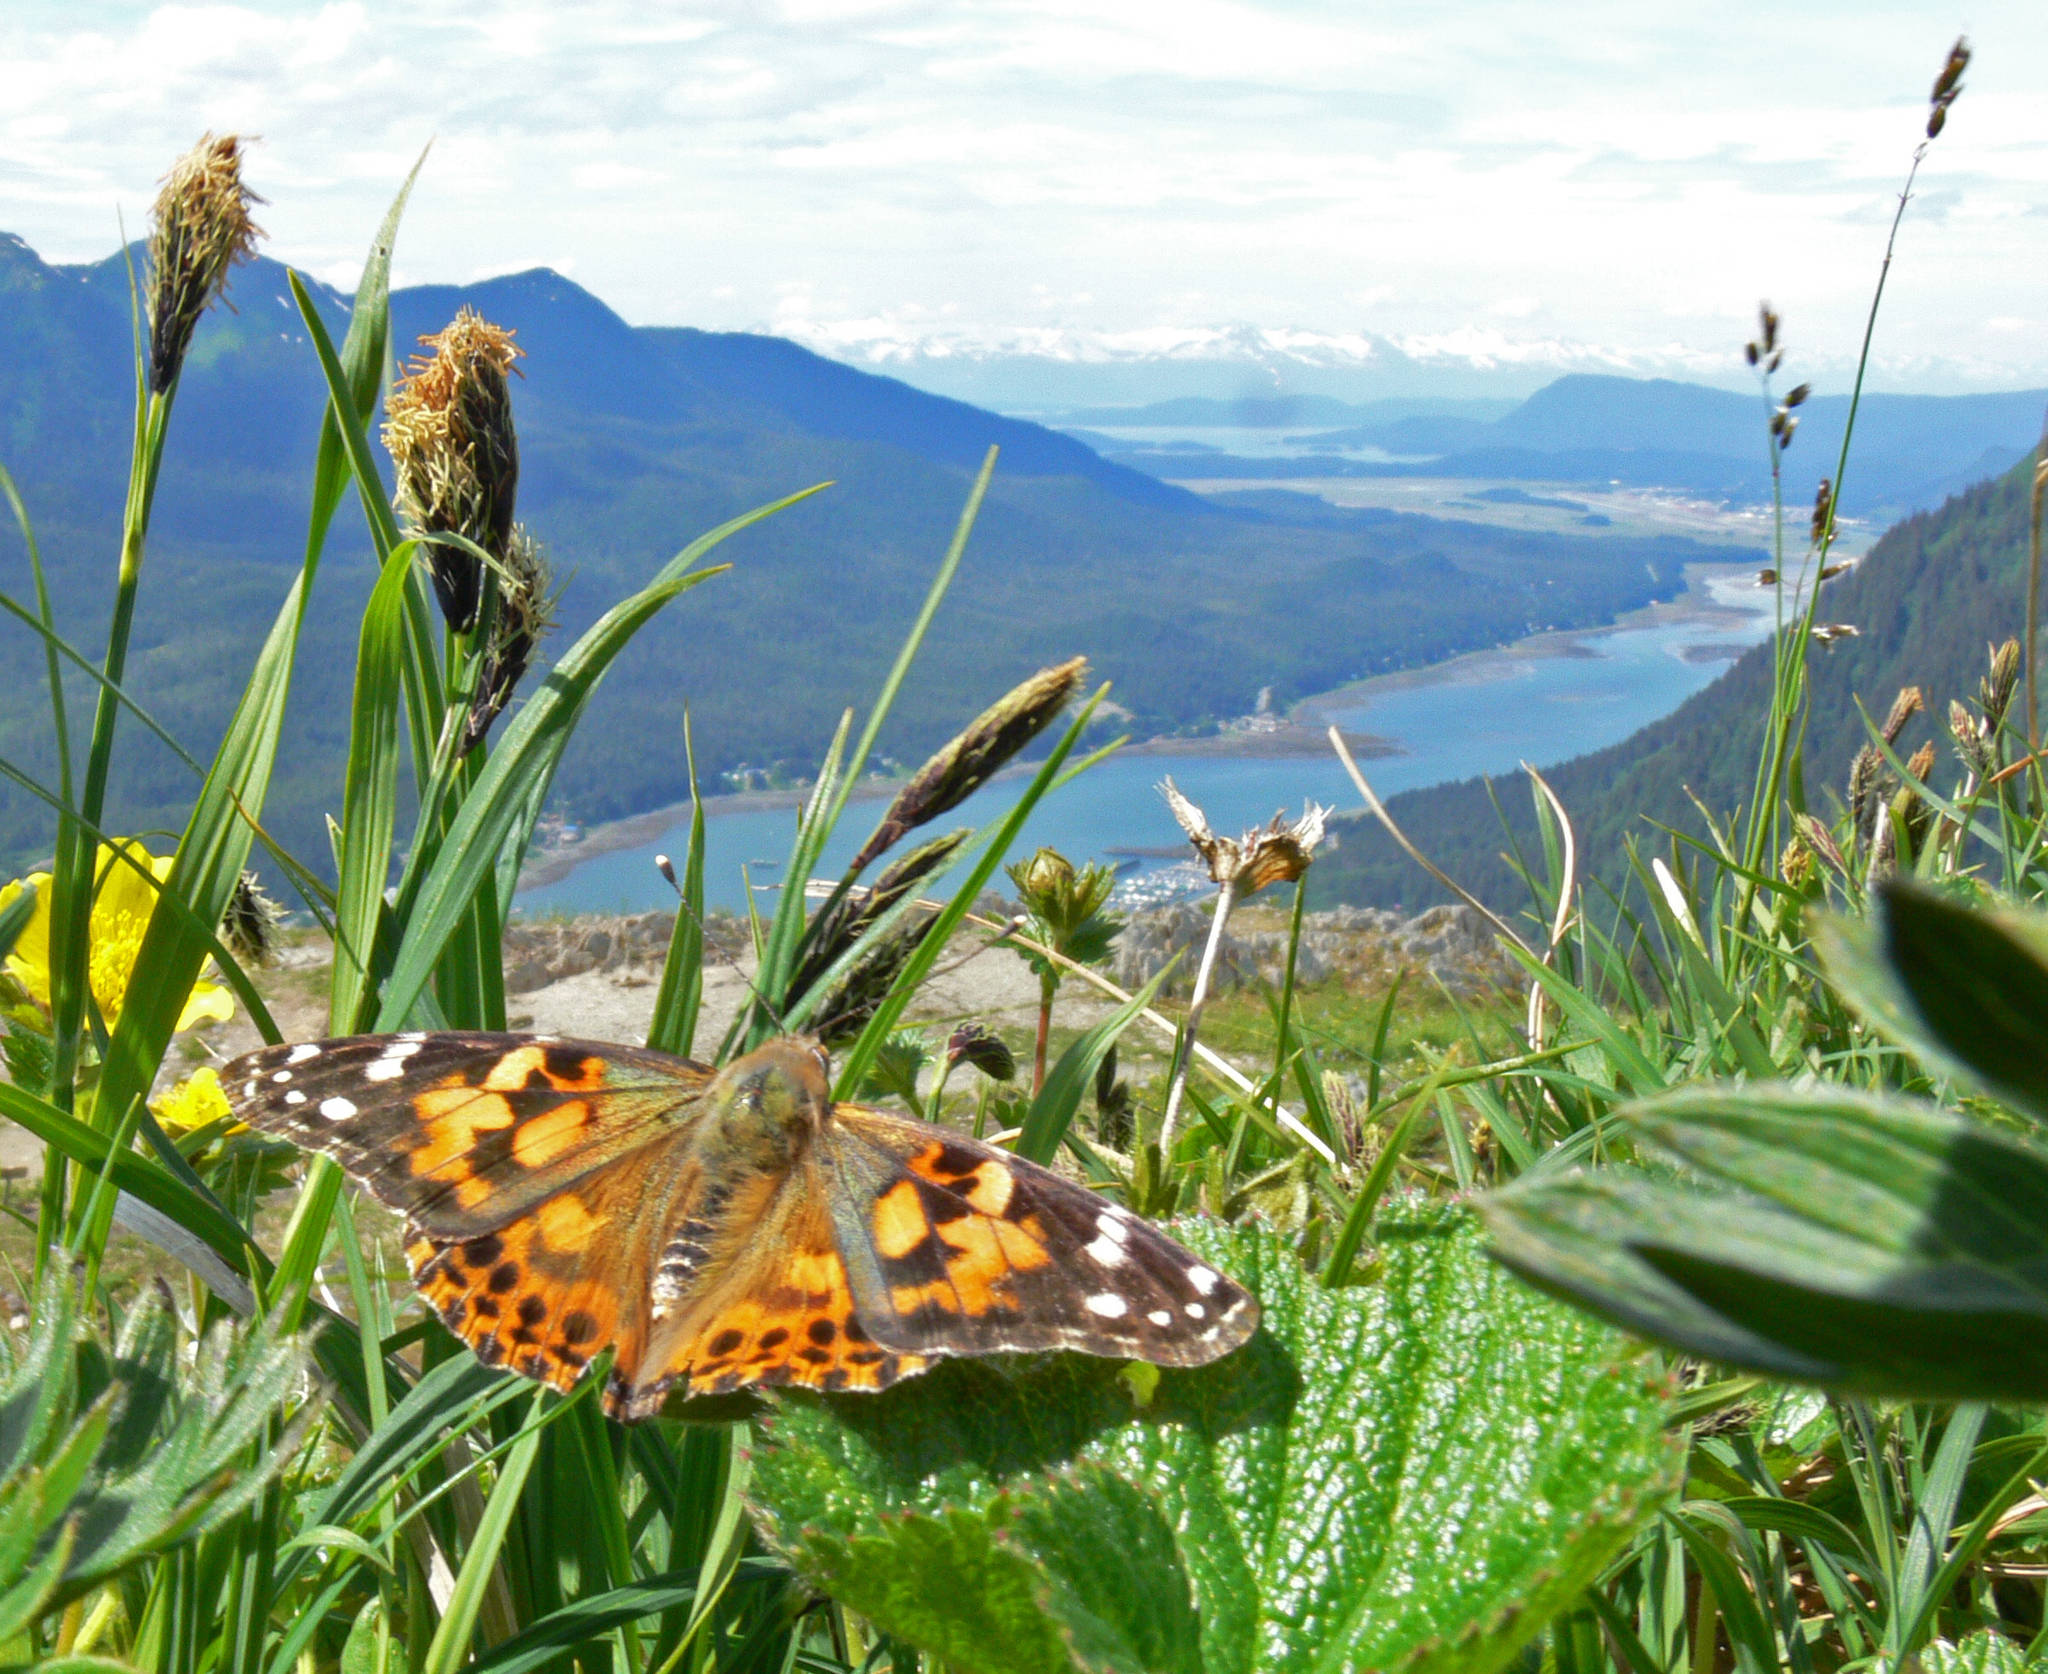 Painted lady butterflies, like this one, migrate in a way similar to monarch butterflies. From wintering areas in Mexico they migrate northward in multiple generations to the Canadian border. (Courtesy Photo | Bob Armstrong)